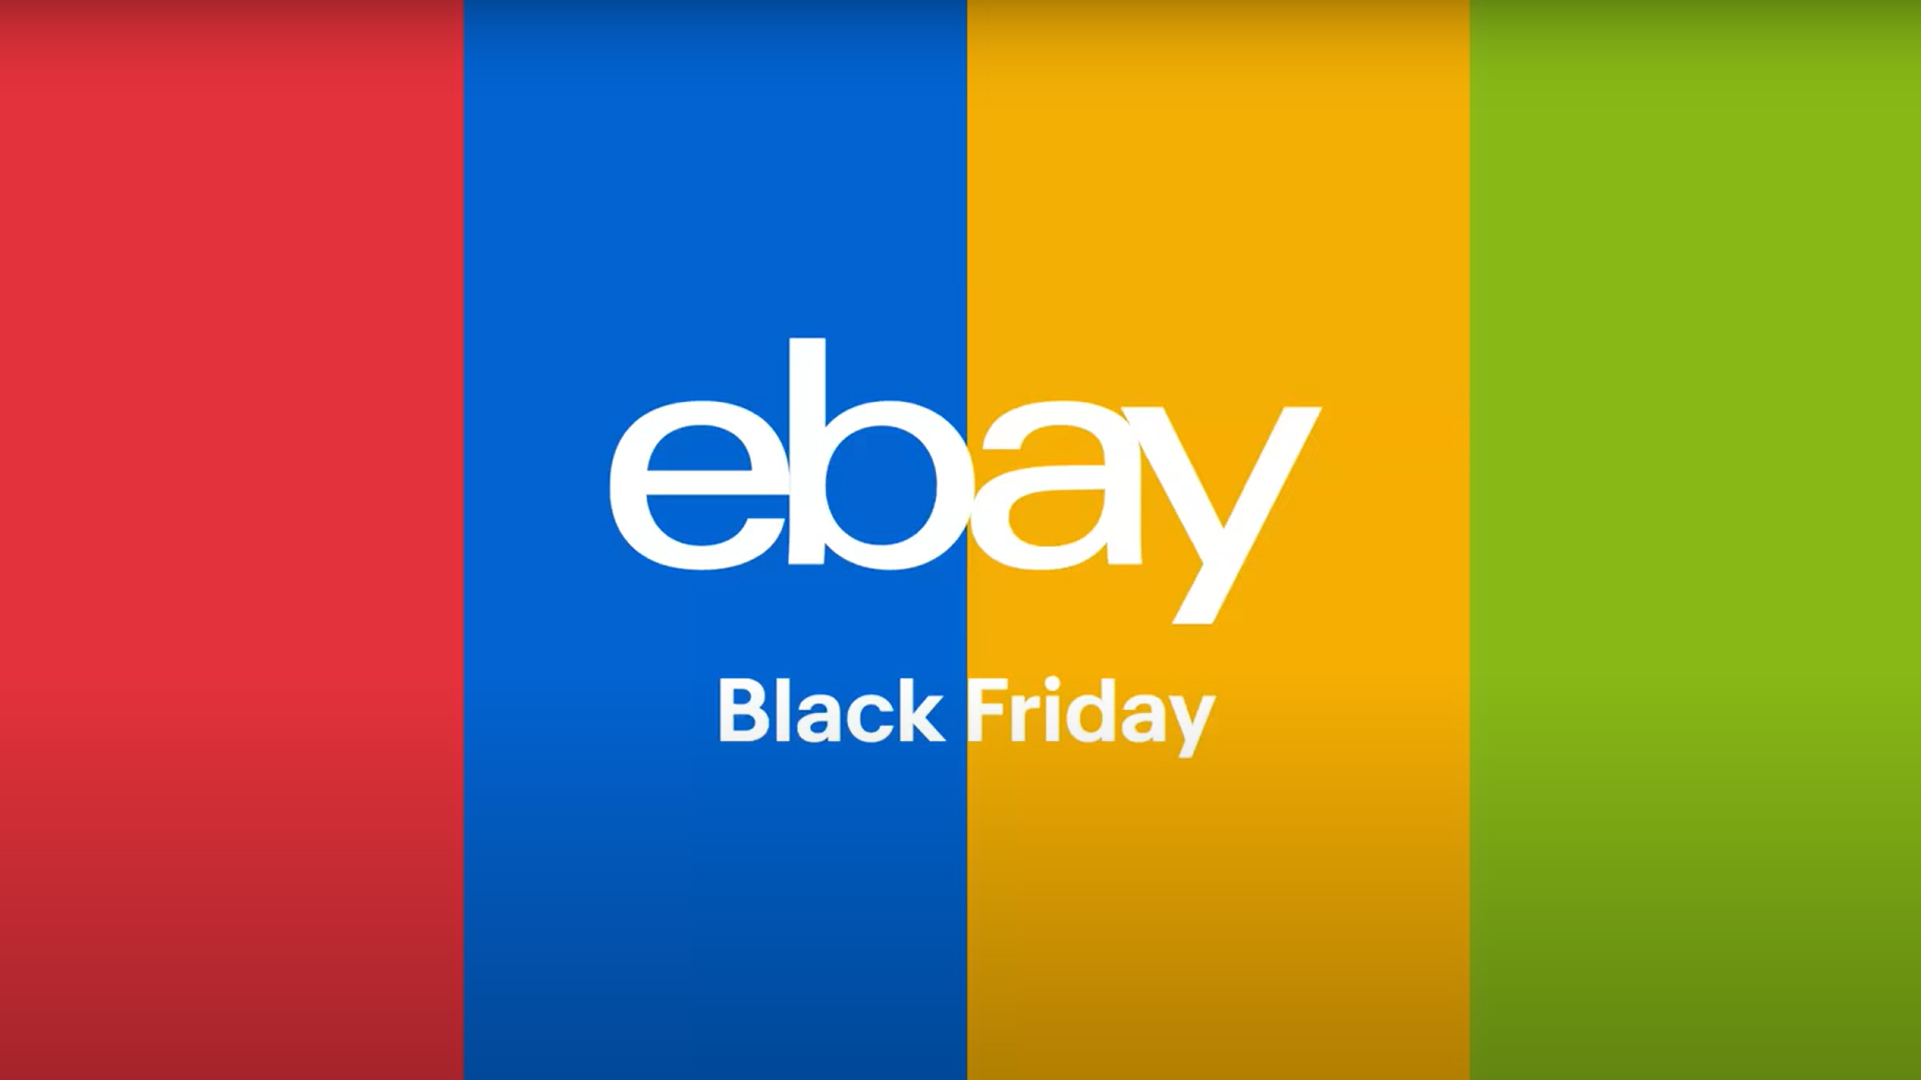 eBay launches “Better than New” Black Friday campaign